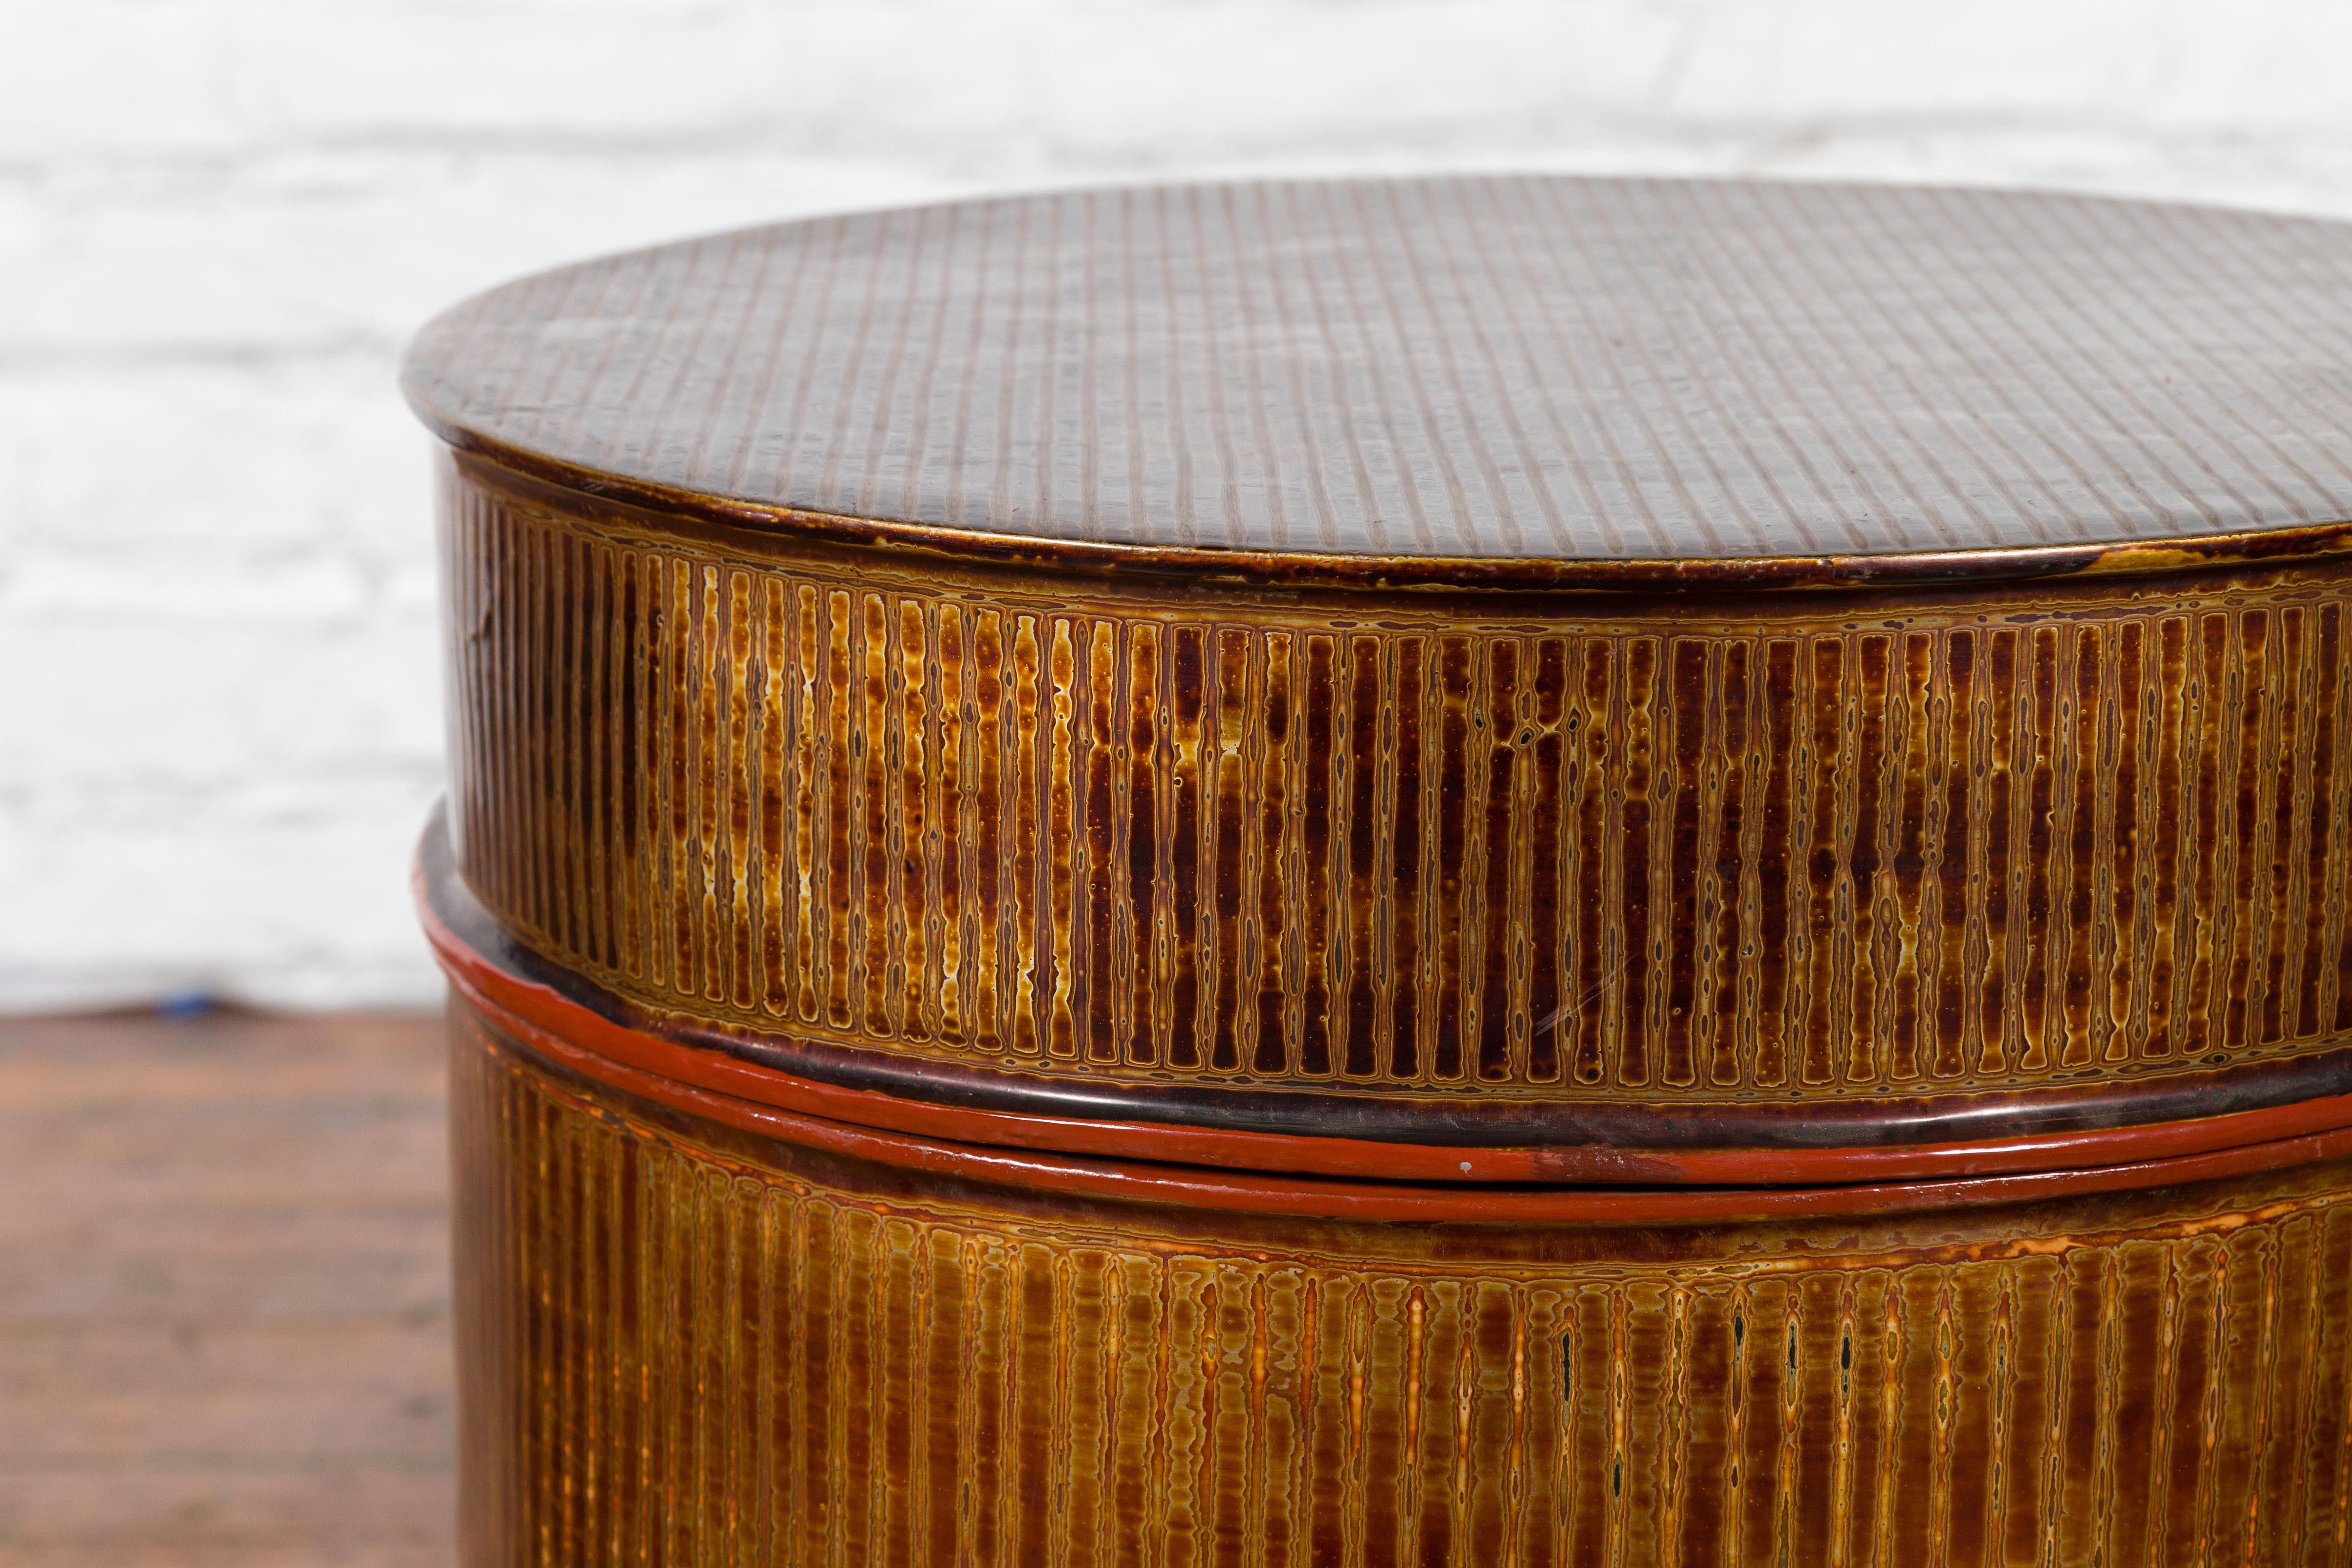 Burmese Vintage Negora Lacquer Circular Storage Bin with Vertical Stripes For Sale 1